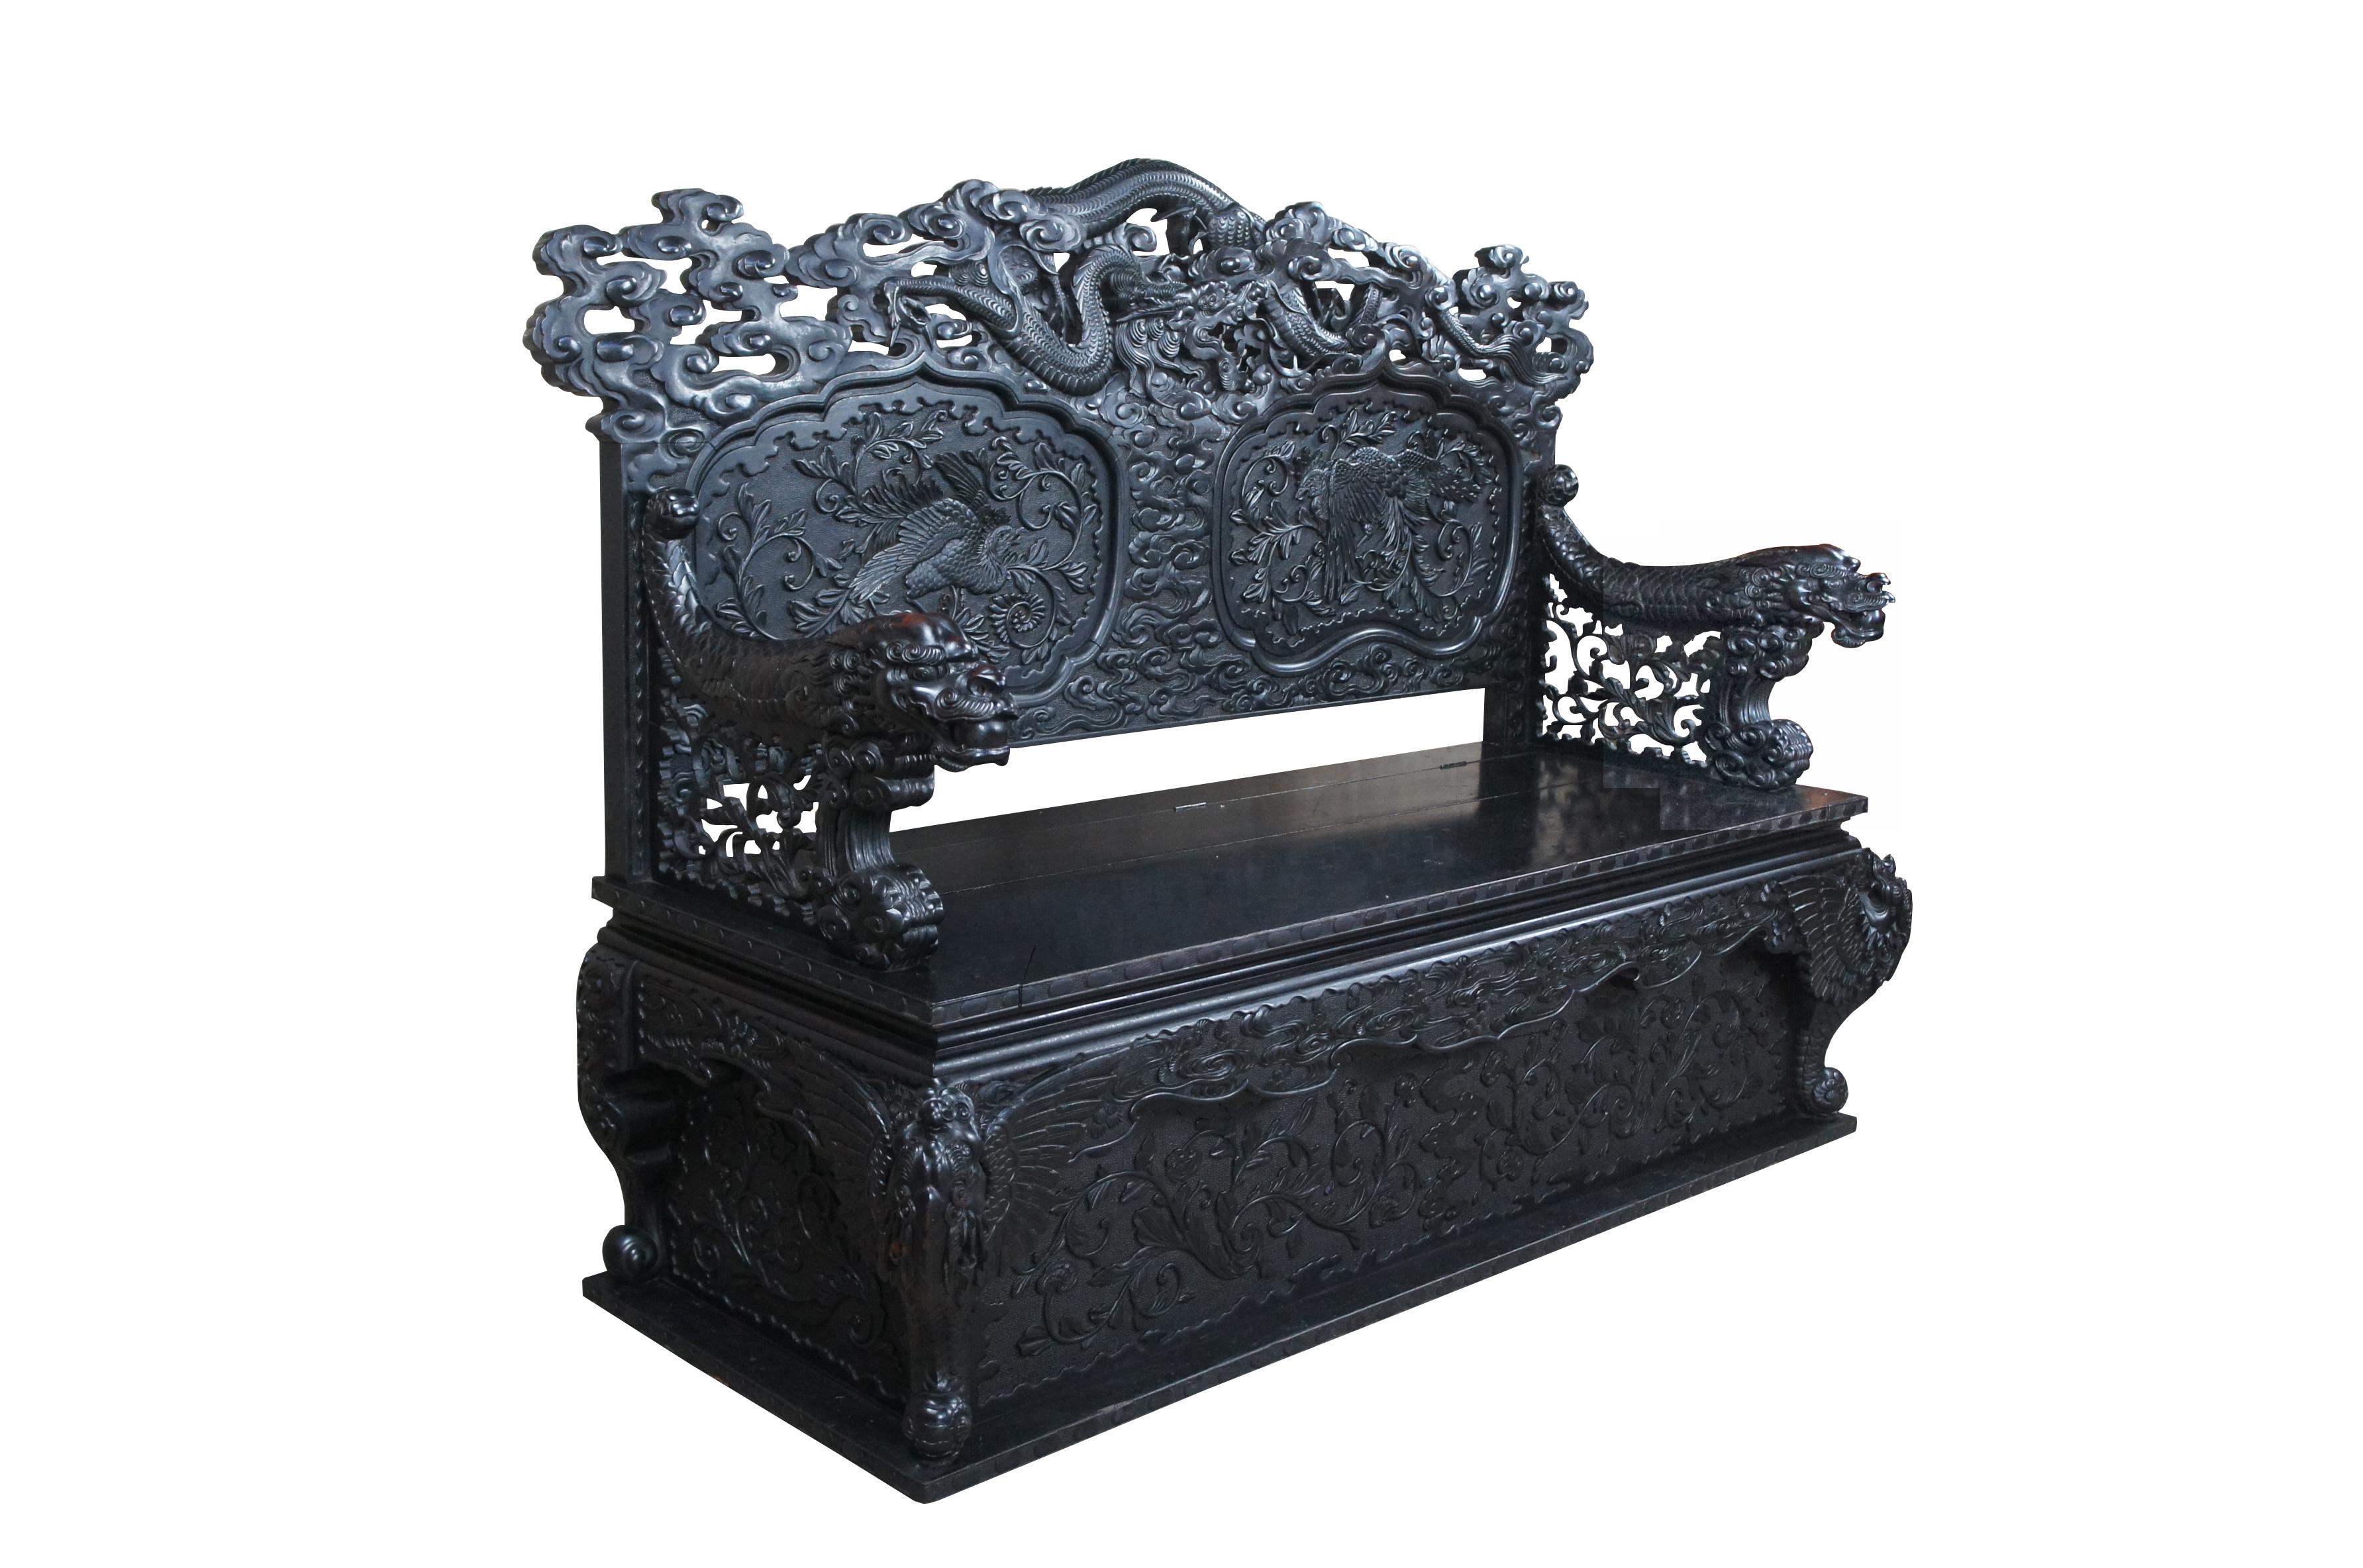 Impressive Imperial Japanese Meiji period Elm Dragon storage bench. Features high relief carved accents and under seat storage. From top to bottom this piece is adorned with three toed dragons. The crown is pierced with a serpentine dragon sprawling